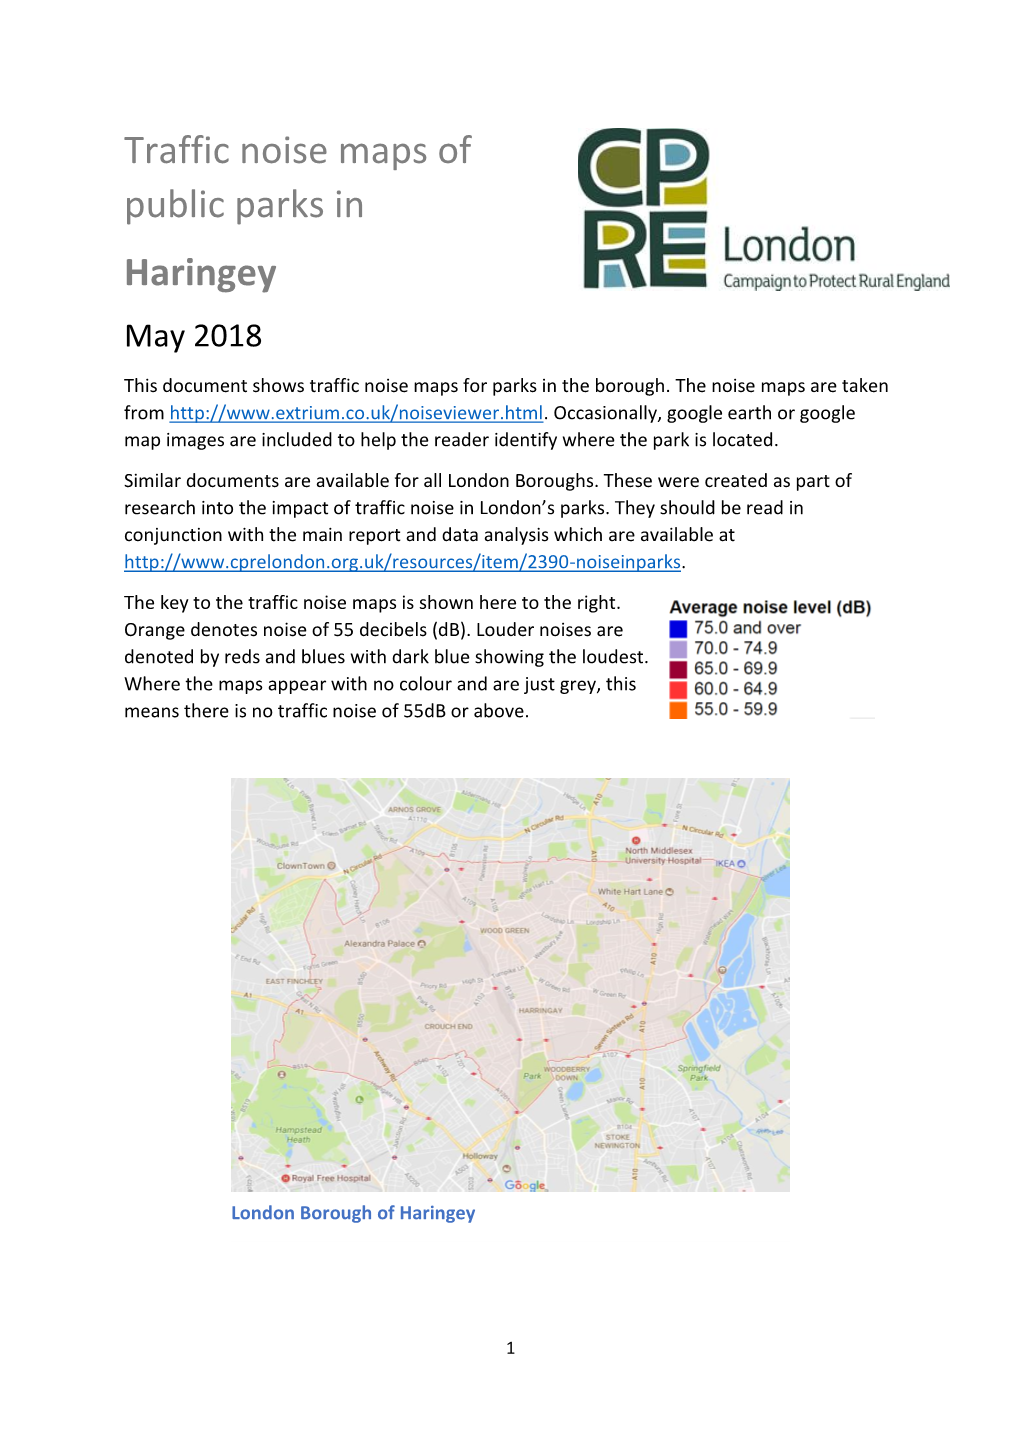 Traffic Noise Maps of Public Parks in Haringey May 2018